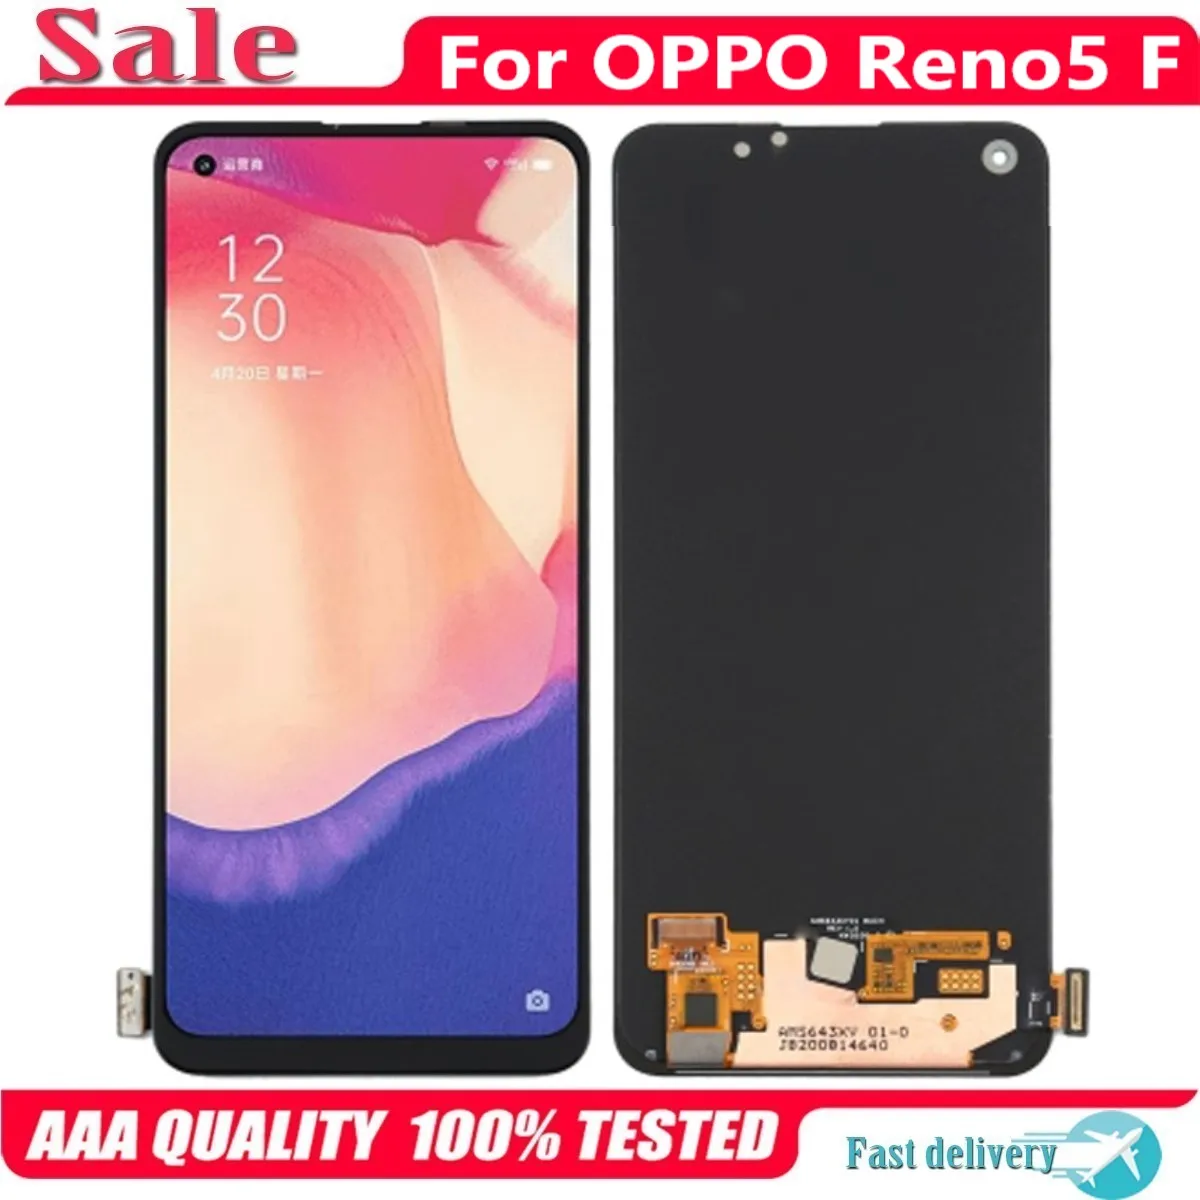 6.43 Original AMOLED Display For OPPO Reno5 F LCD Touch Screen Replacement Digitizer Assembly For Reno 5 F 5F CPH2217 Display